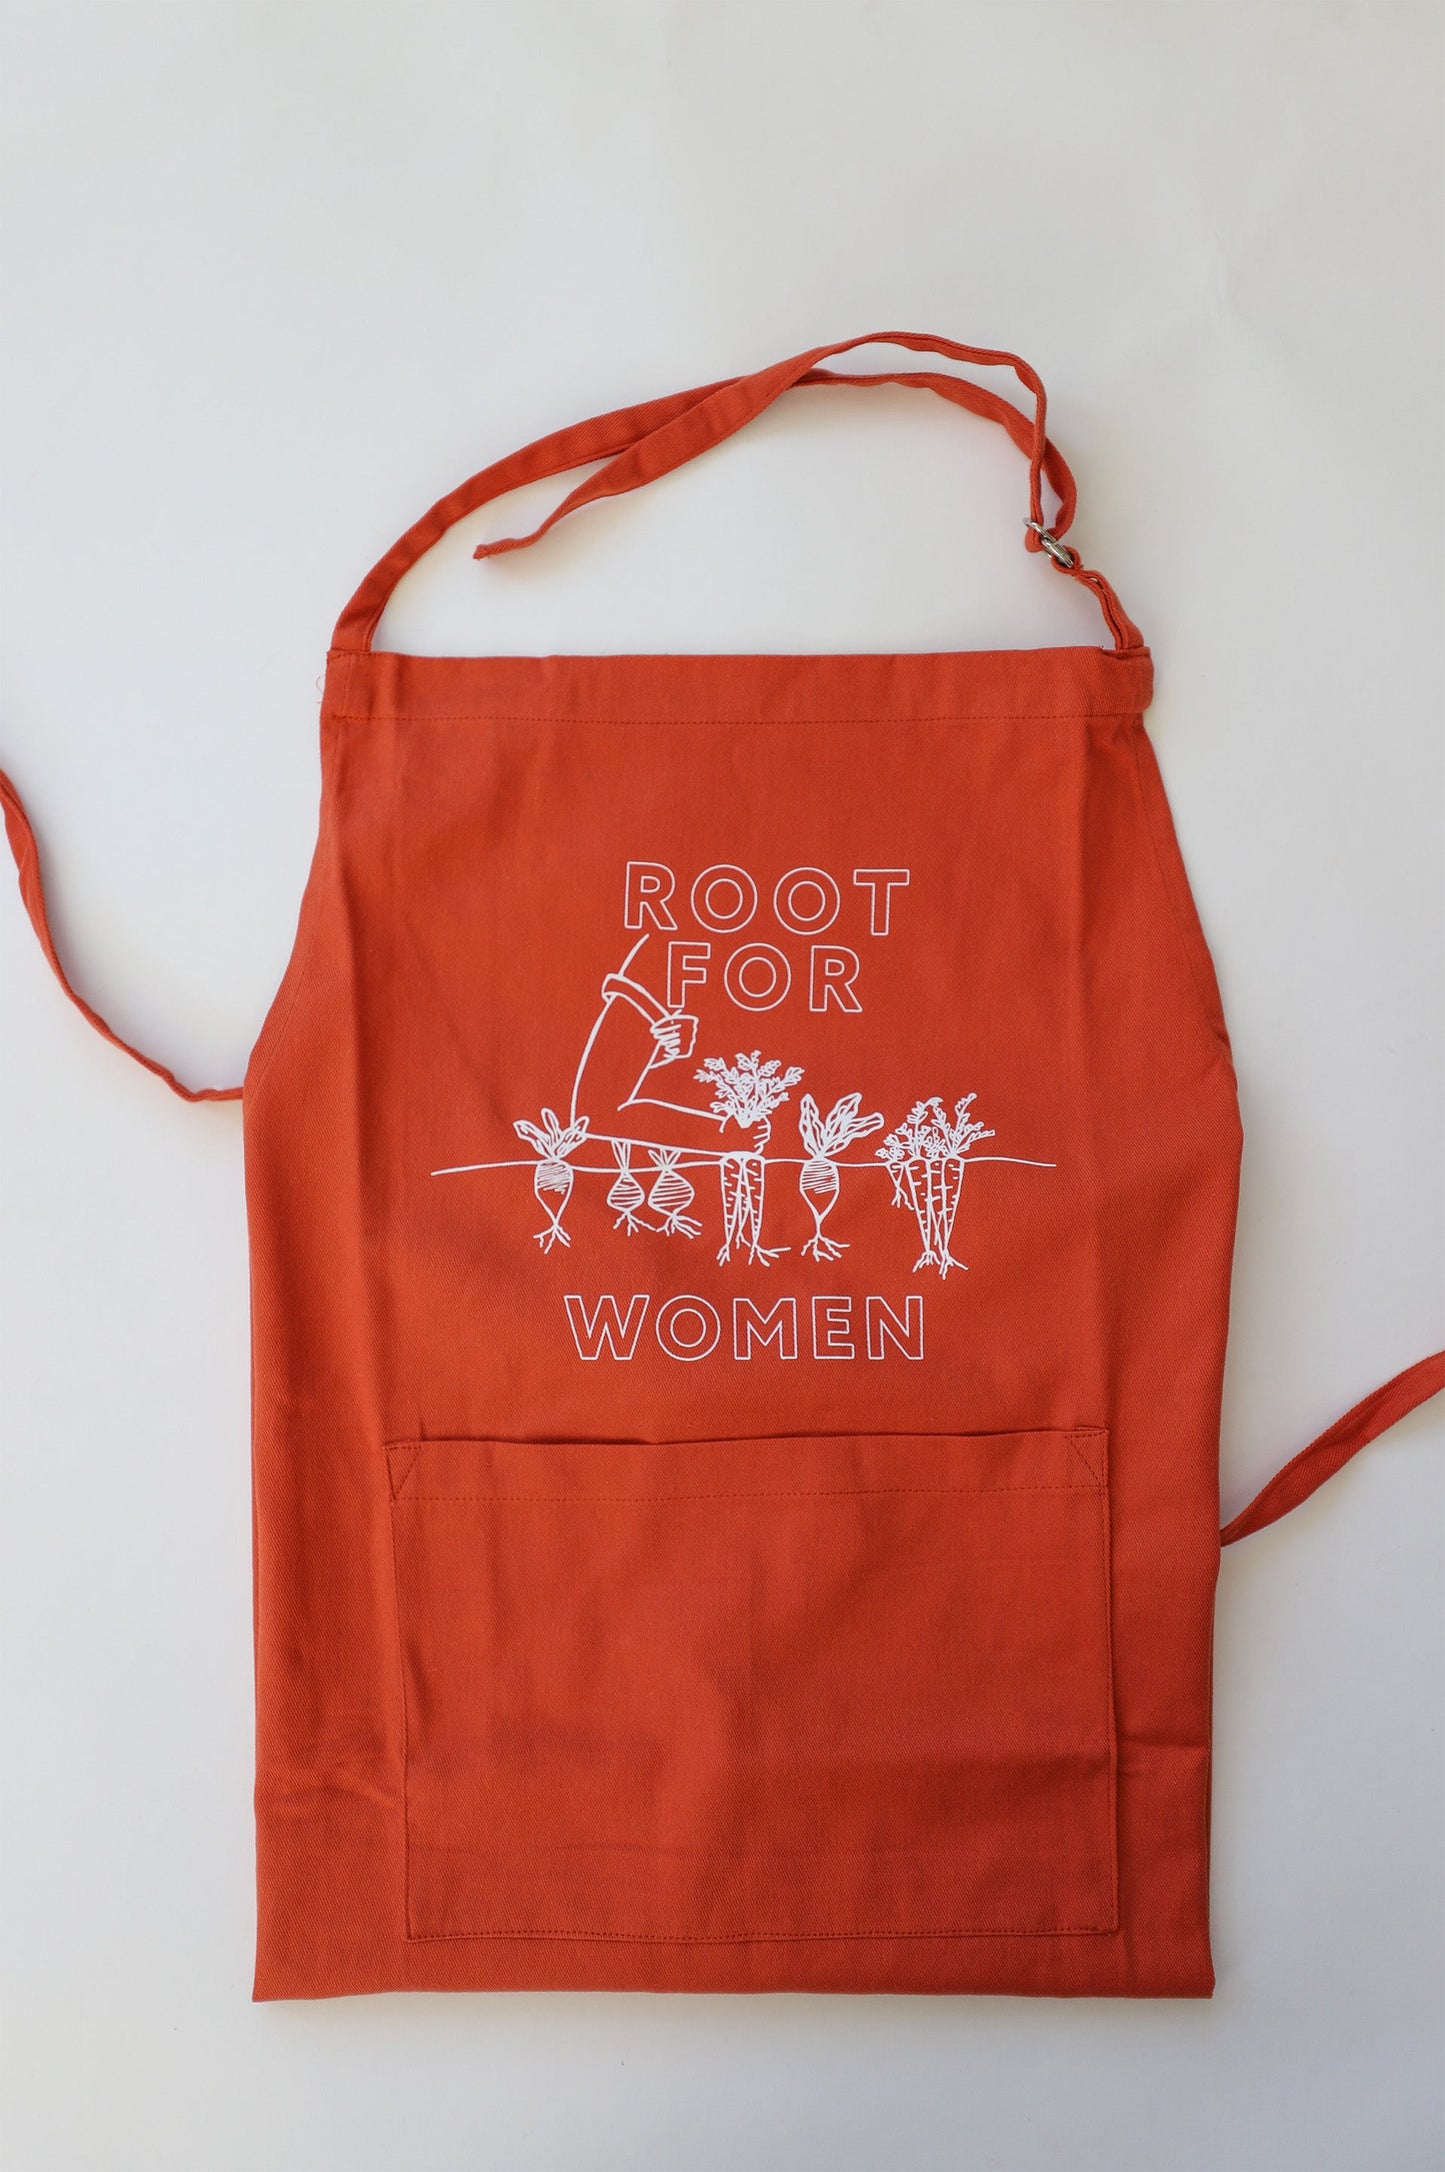 A folded carrot orange apron with "Root for Women" in block letters